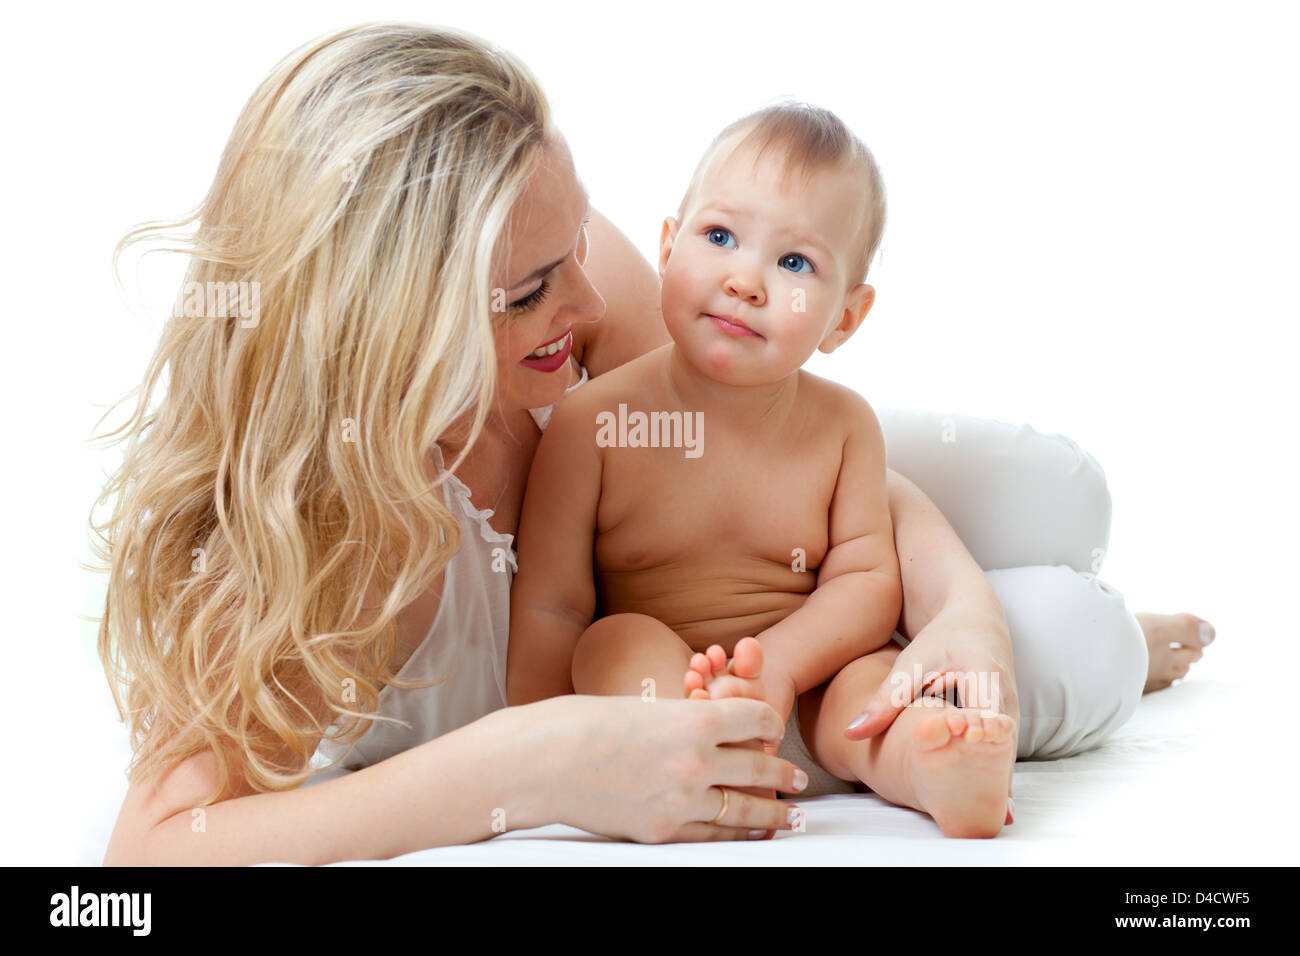 Loving mother embraces her child Stock Photo